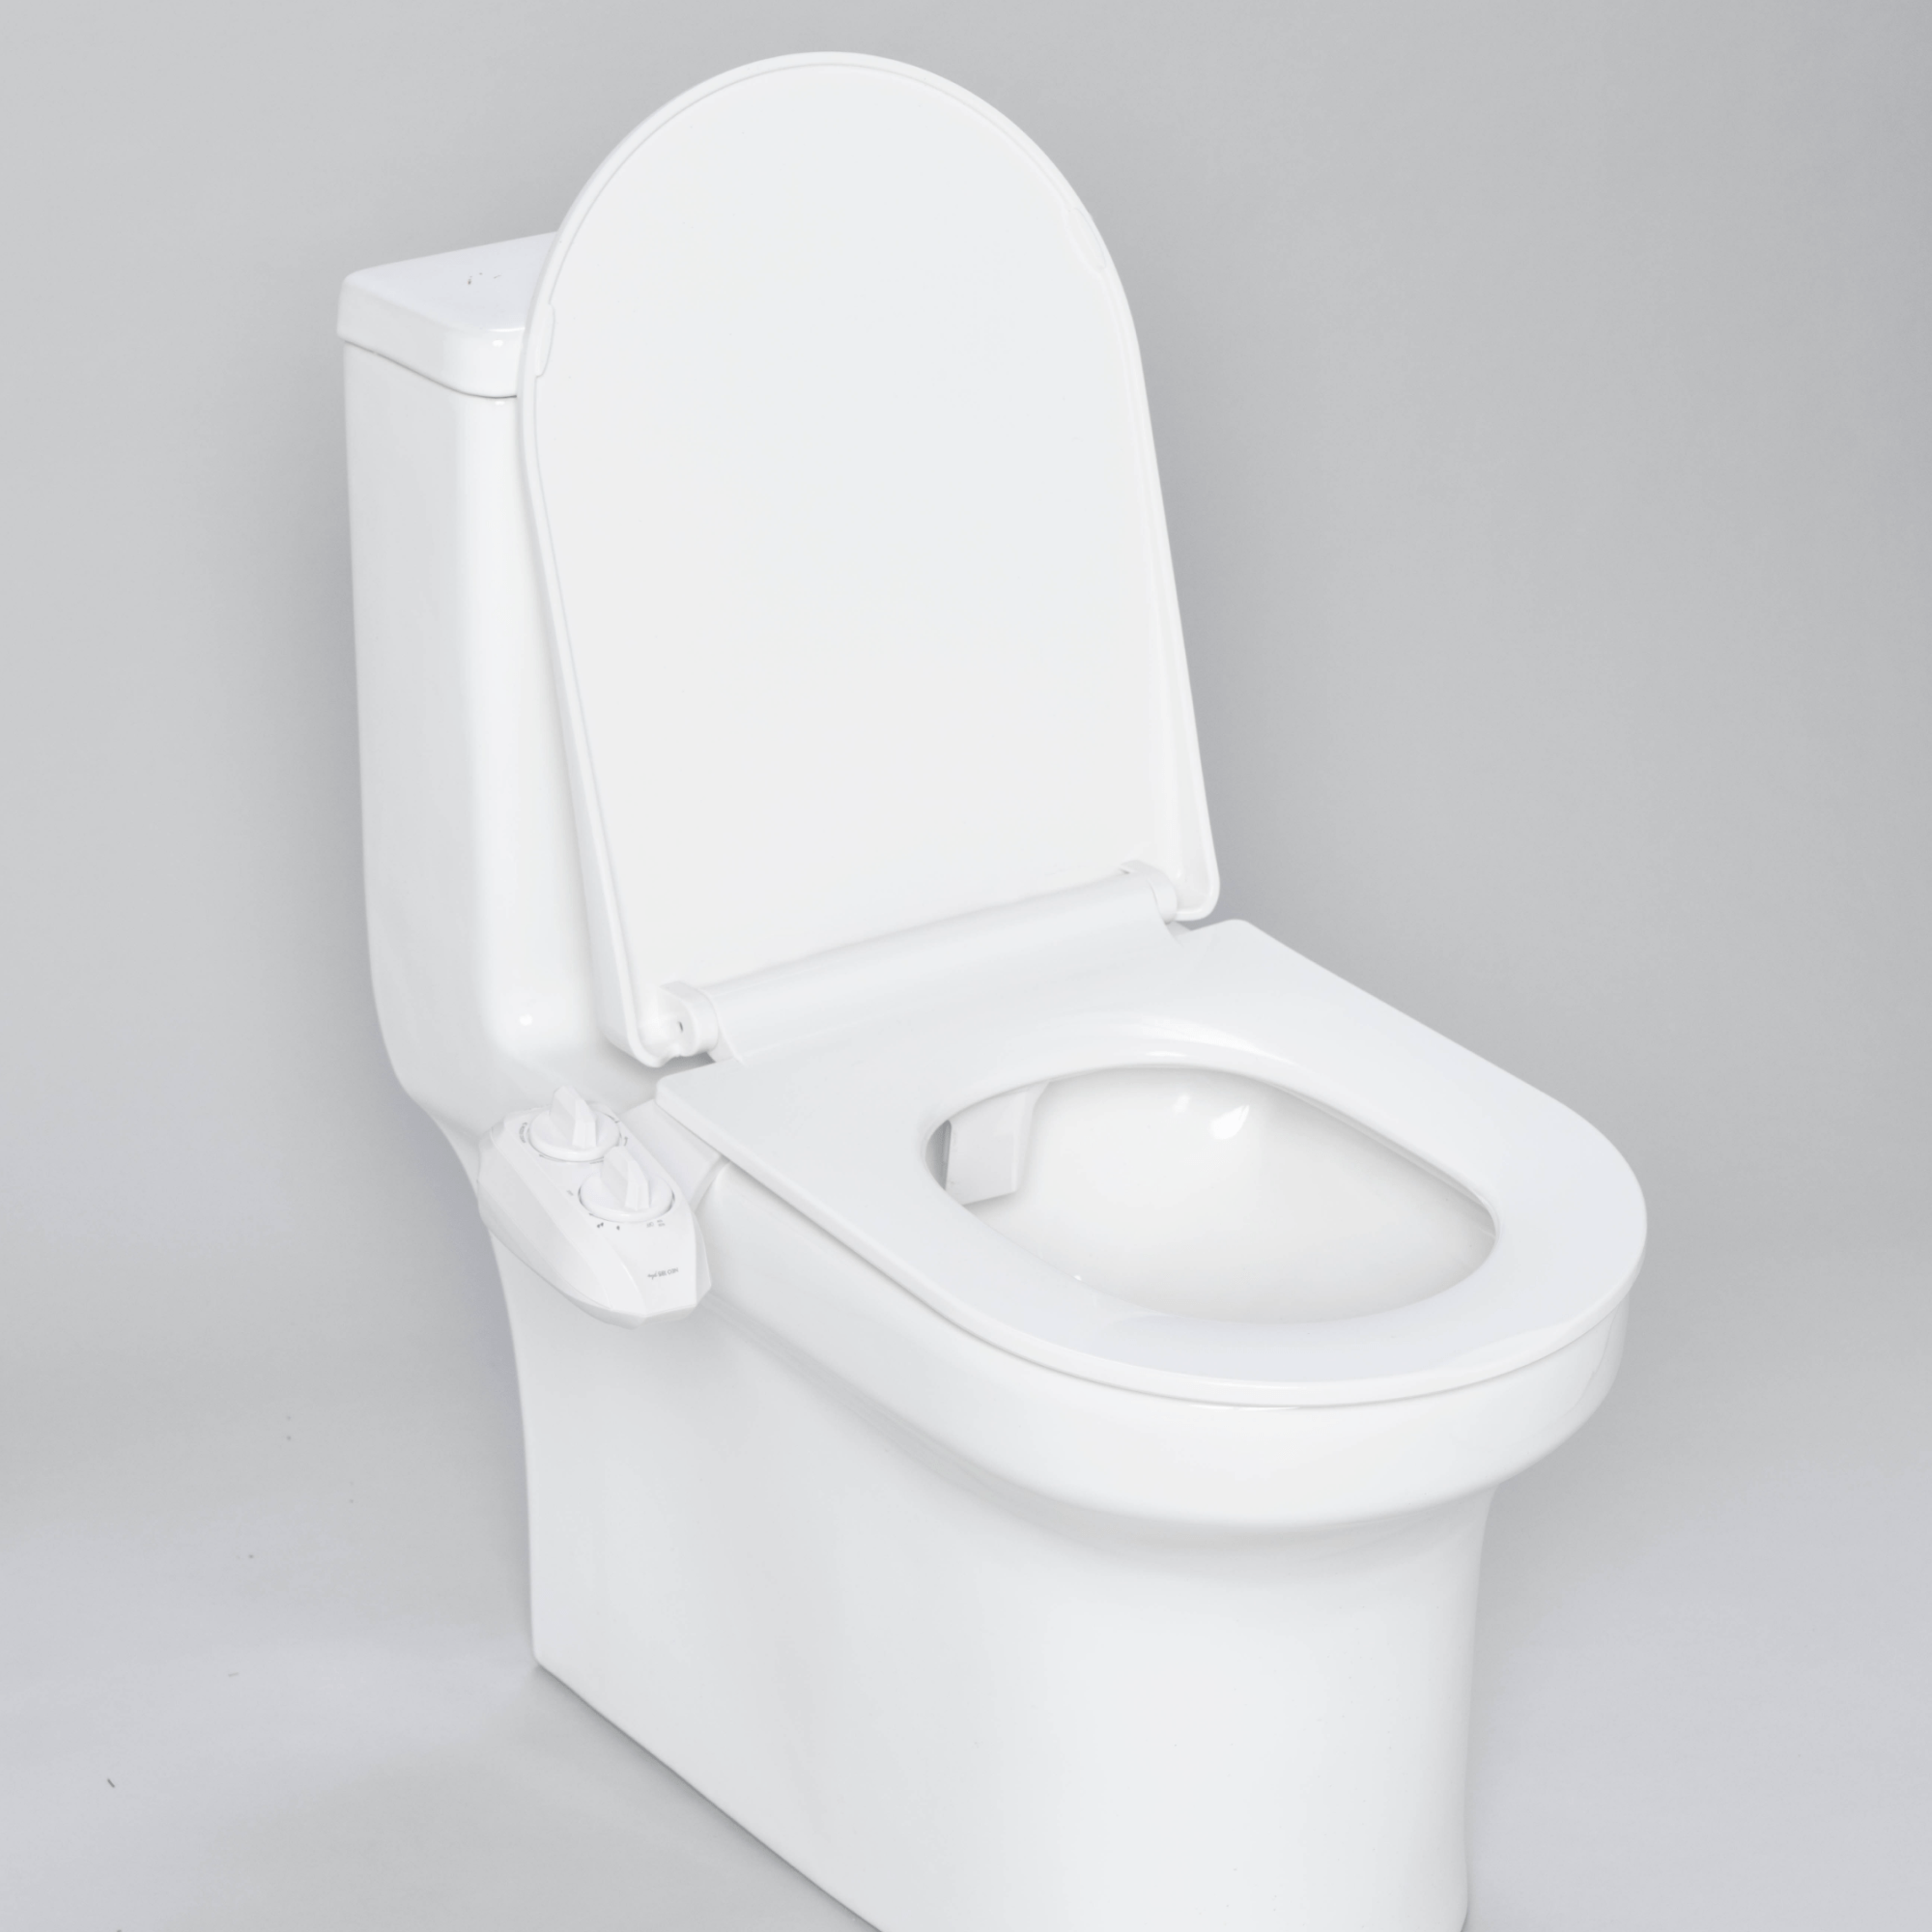 NEO 185 Plus: Imperfect Packaging - NEO 185 Plus White installed on a modern toilet, with lid open